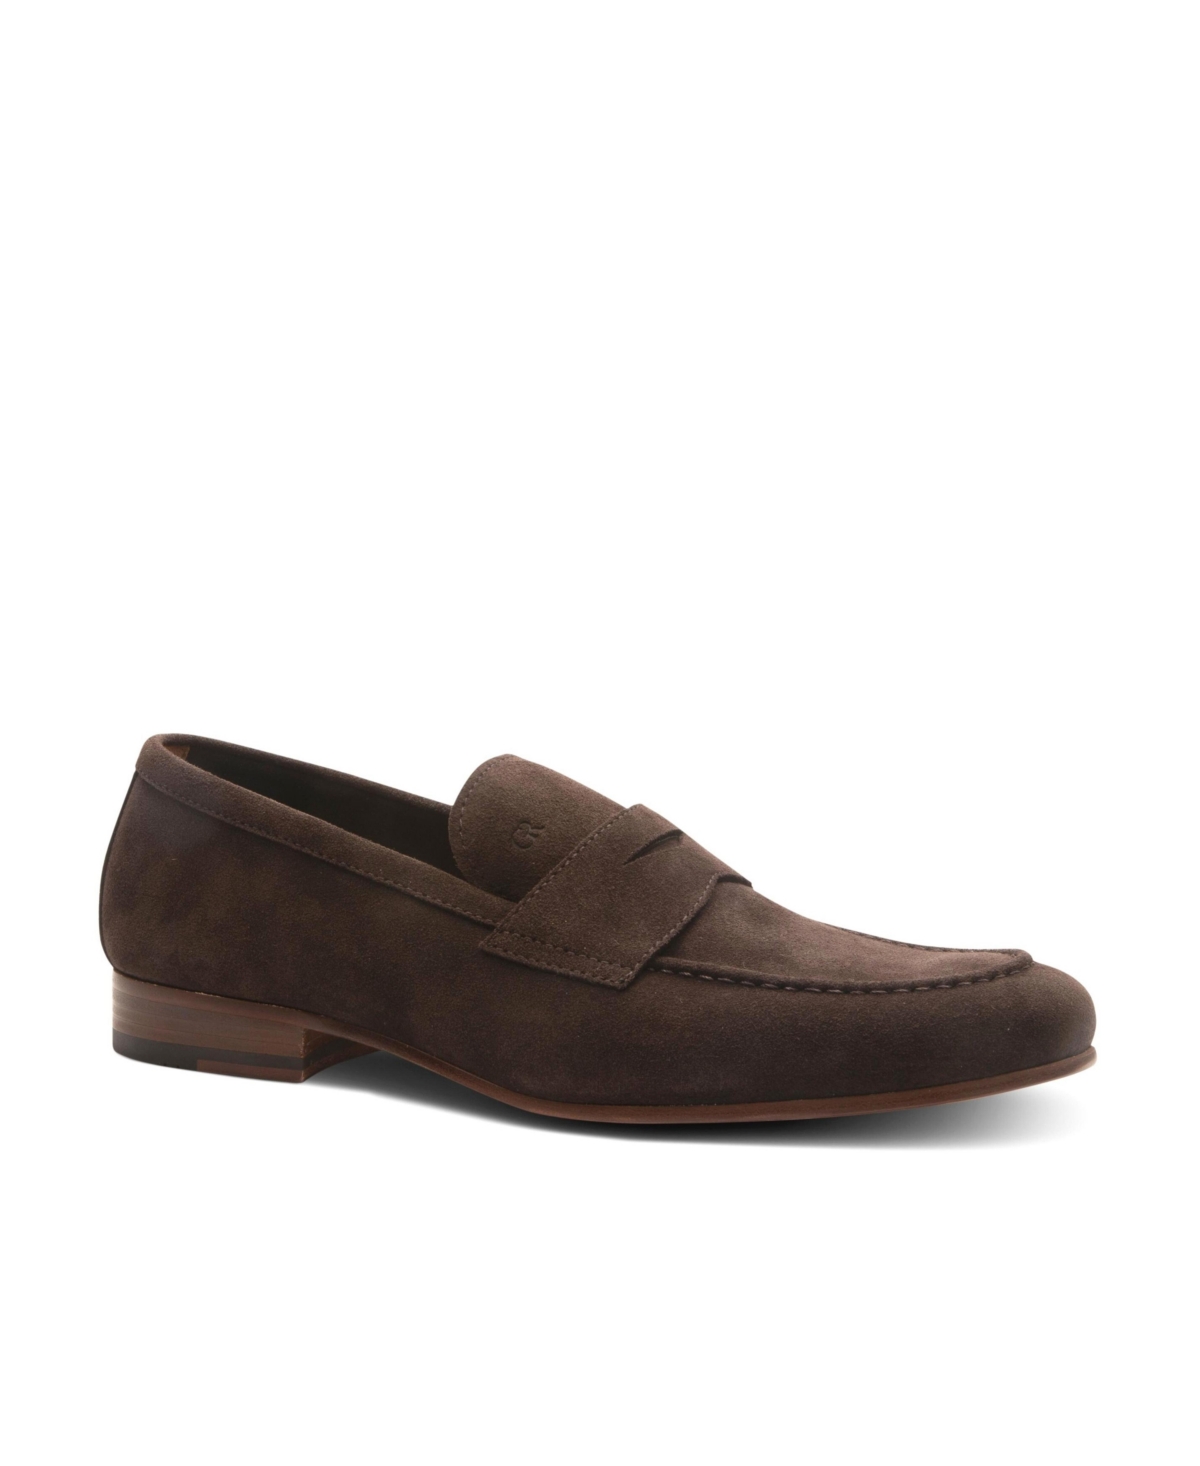 Men's Cartwright Dress Casual Slip-On Penny Loafer - Chocolate